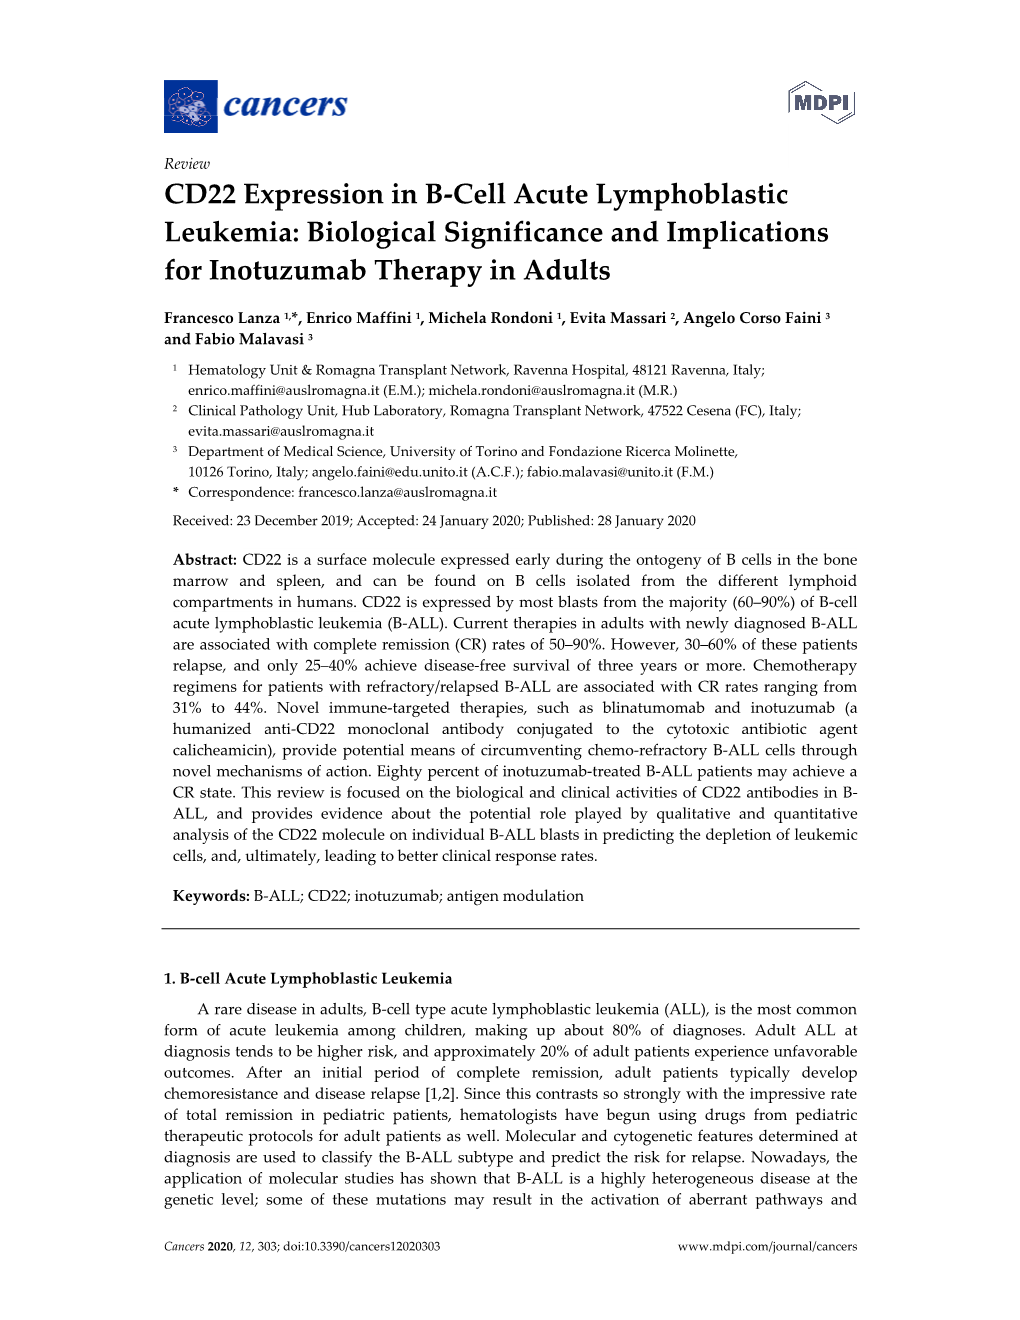 CD22 Expression in B-Cell Acute Lymphoblastic Leukemia: Biological Significance and Implications for Inotuzumab Therapy in Adults